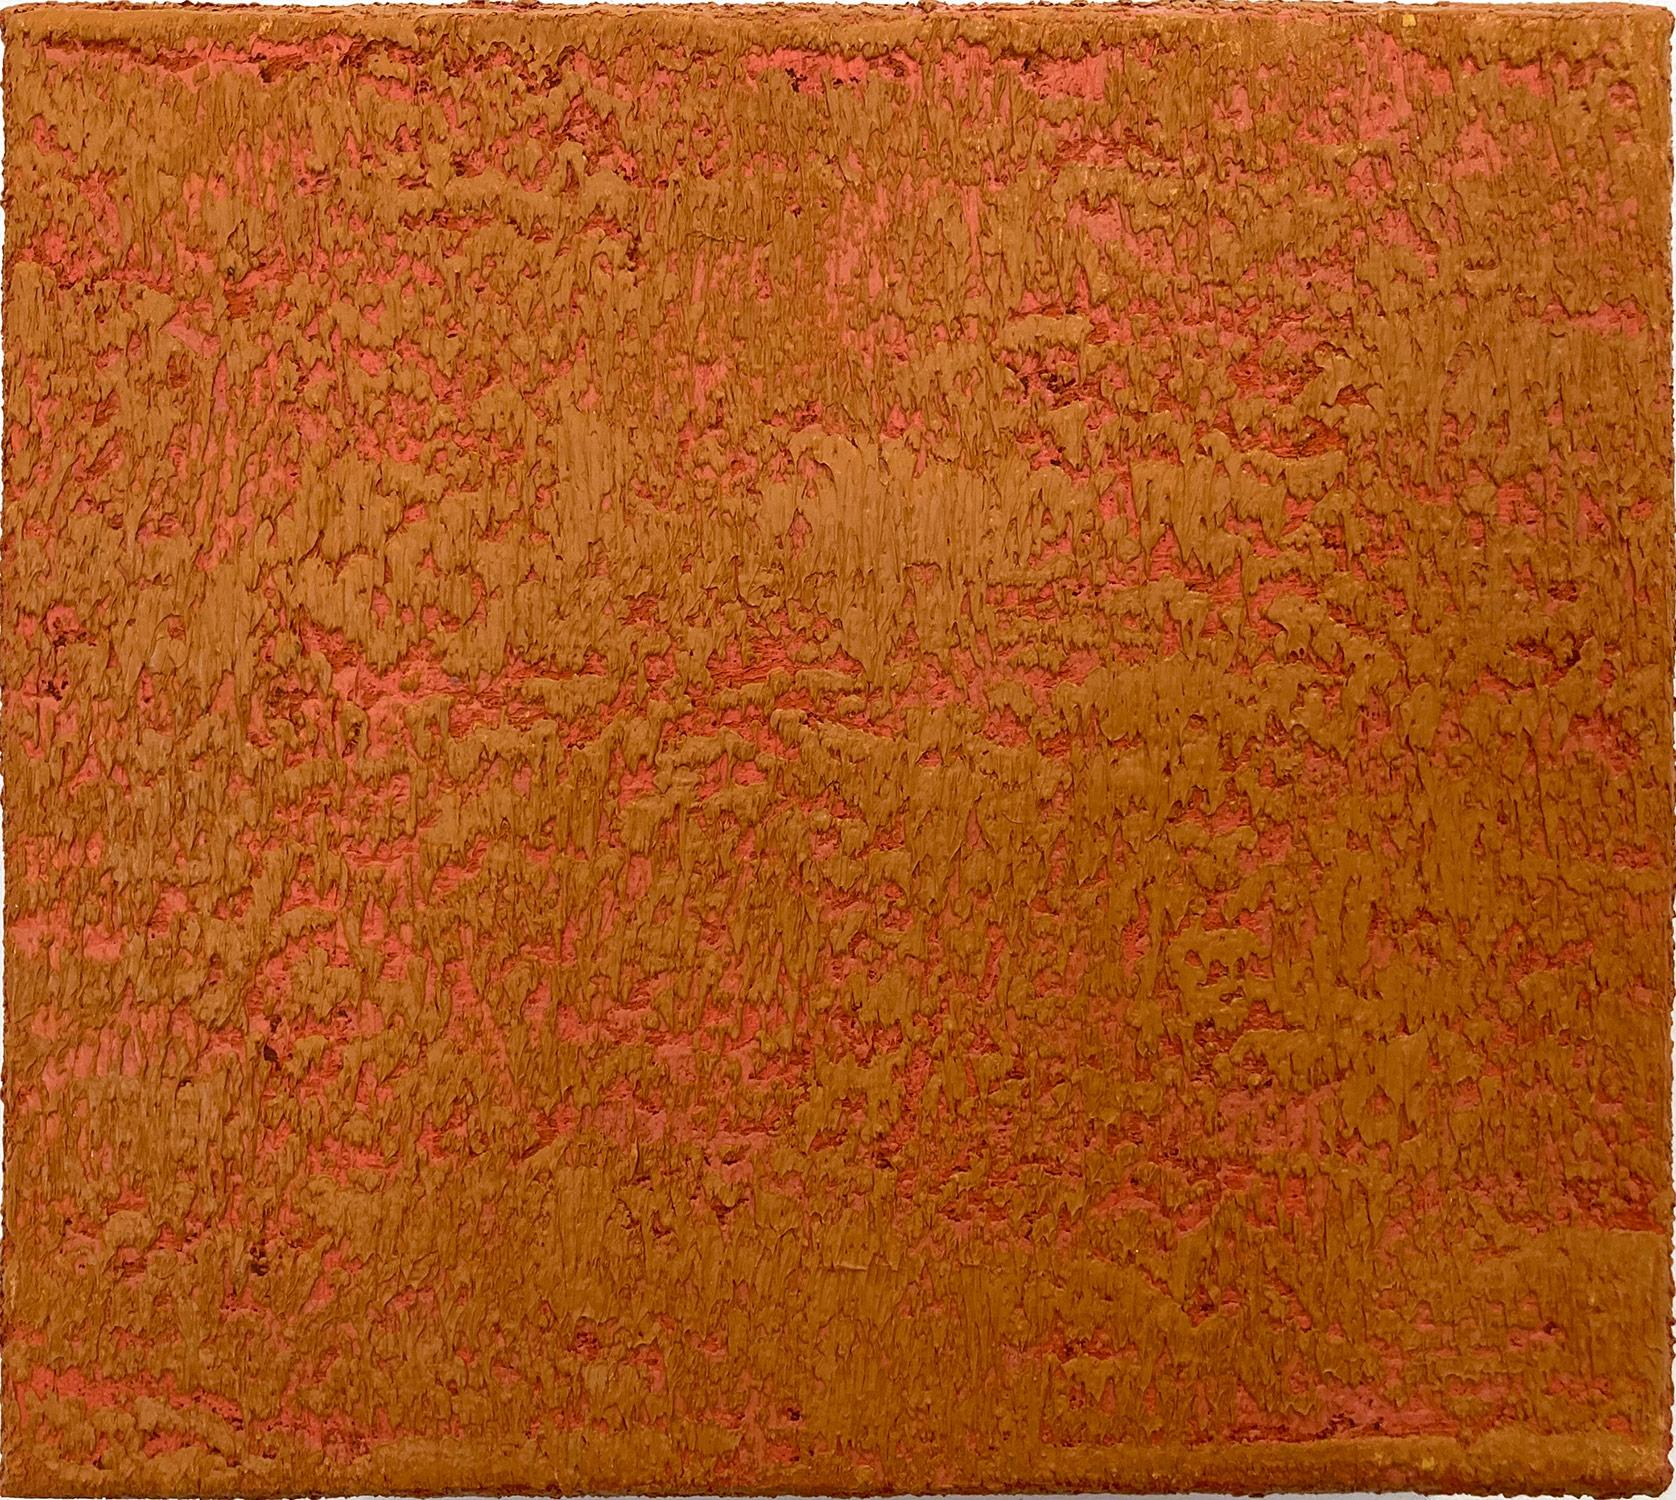 Rene Rietmeyer Abstract Painting - "Canada VII" Mid Century Style Abstract Cube Texture of Orange Tones